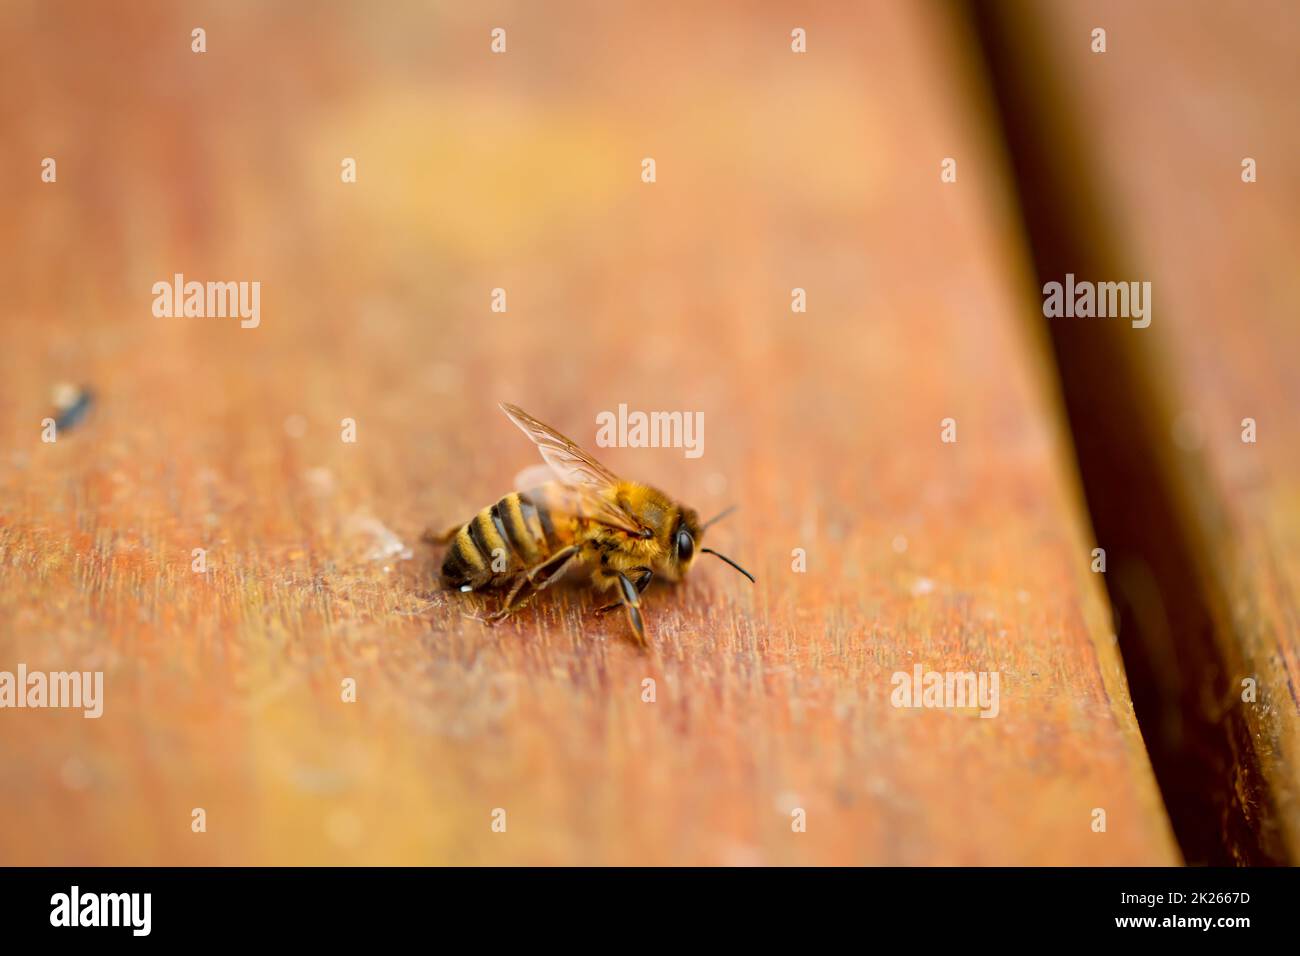 A bee on a wooden board. Bees are social insects. Stock Photo